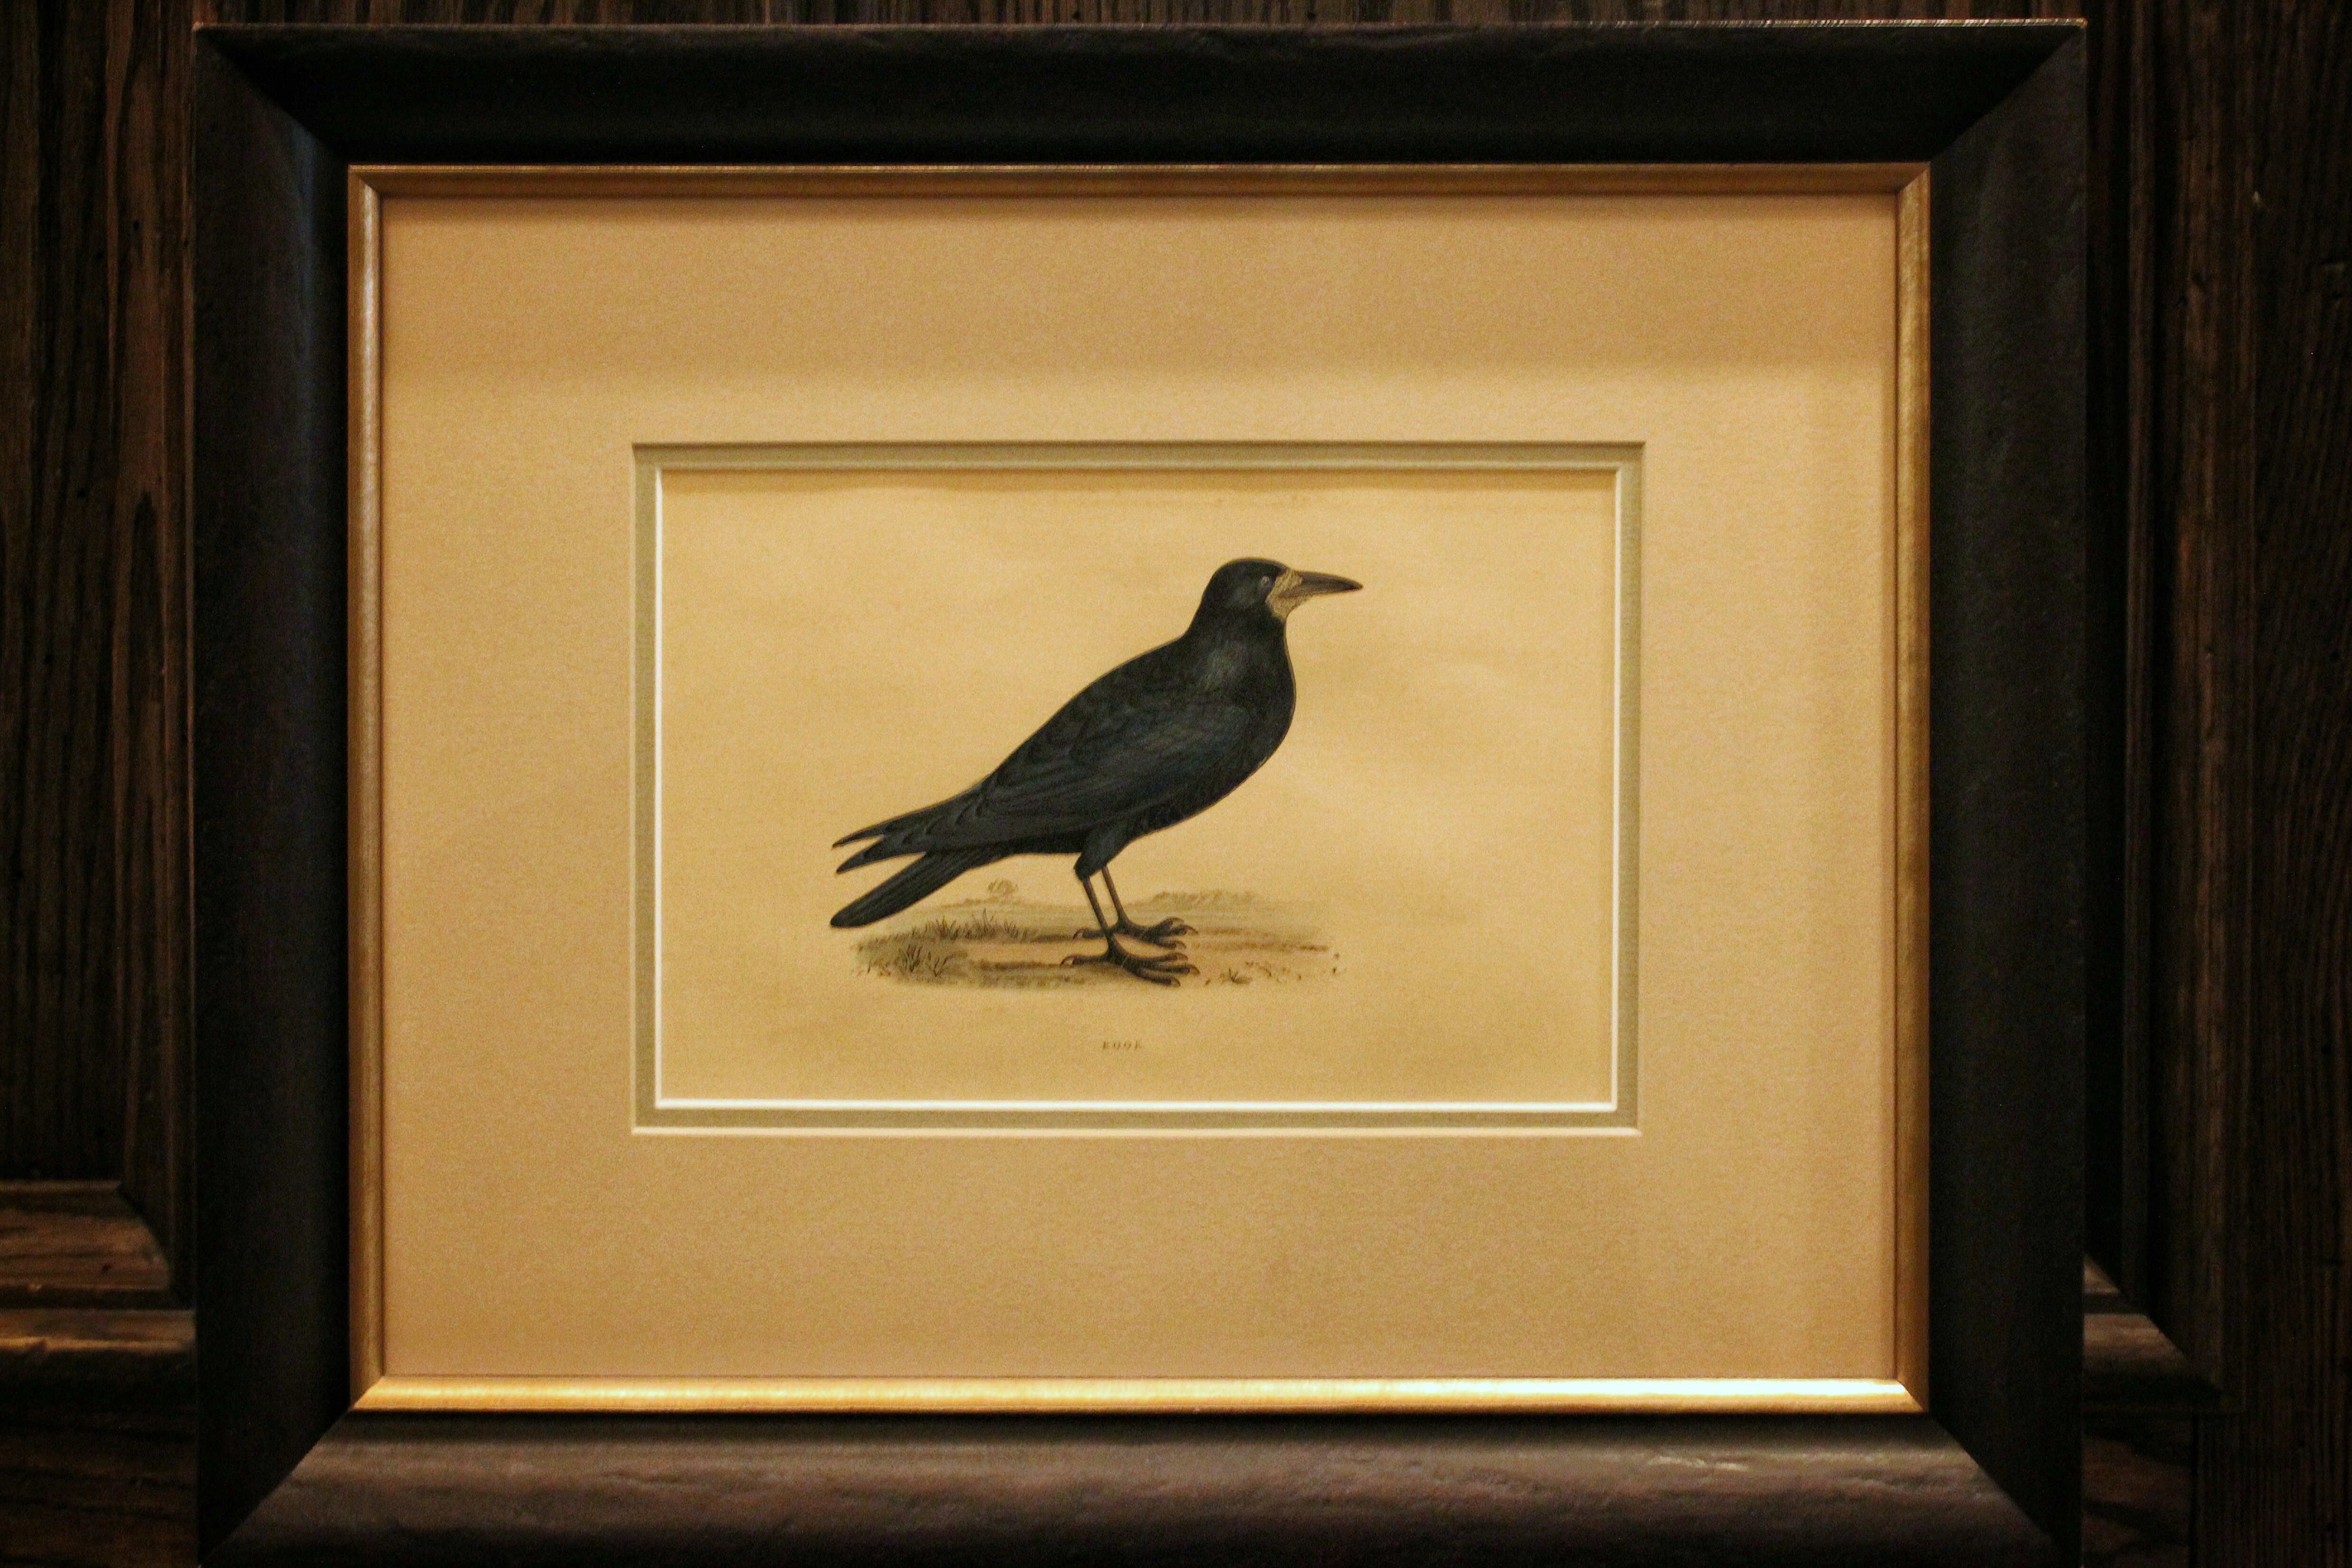 A framed sketch of a raven at The Beekman.